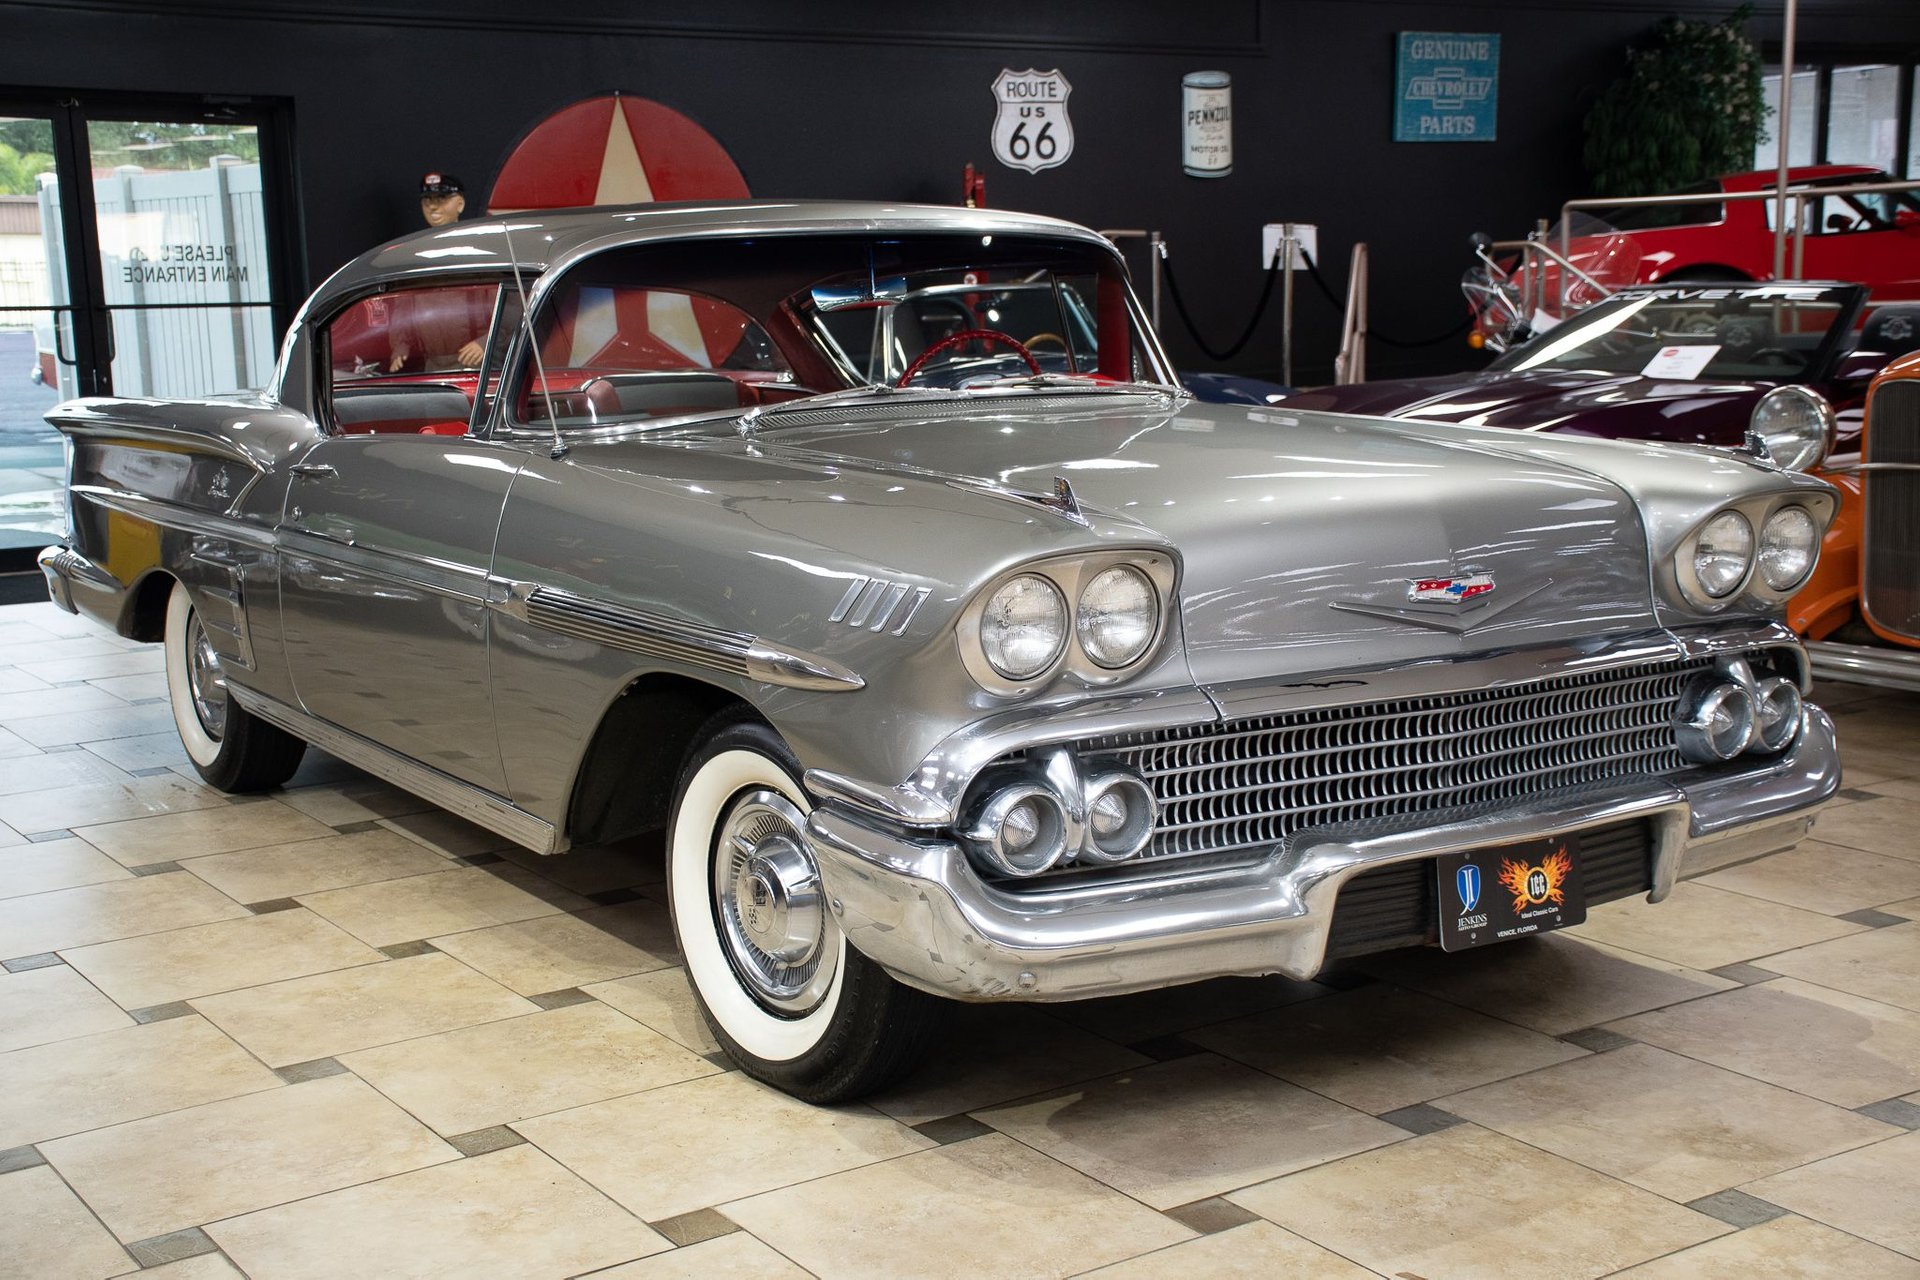 world meet a surprising 1958 chevrolet impala that spent nearly half a century in a barn 5